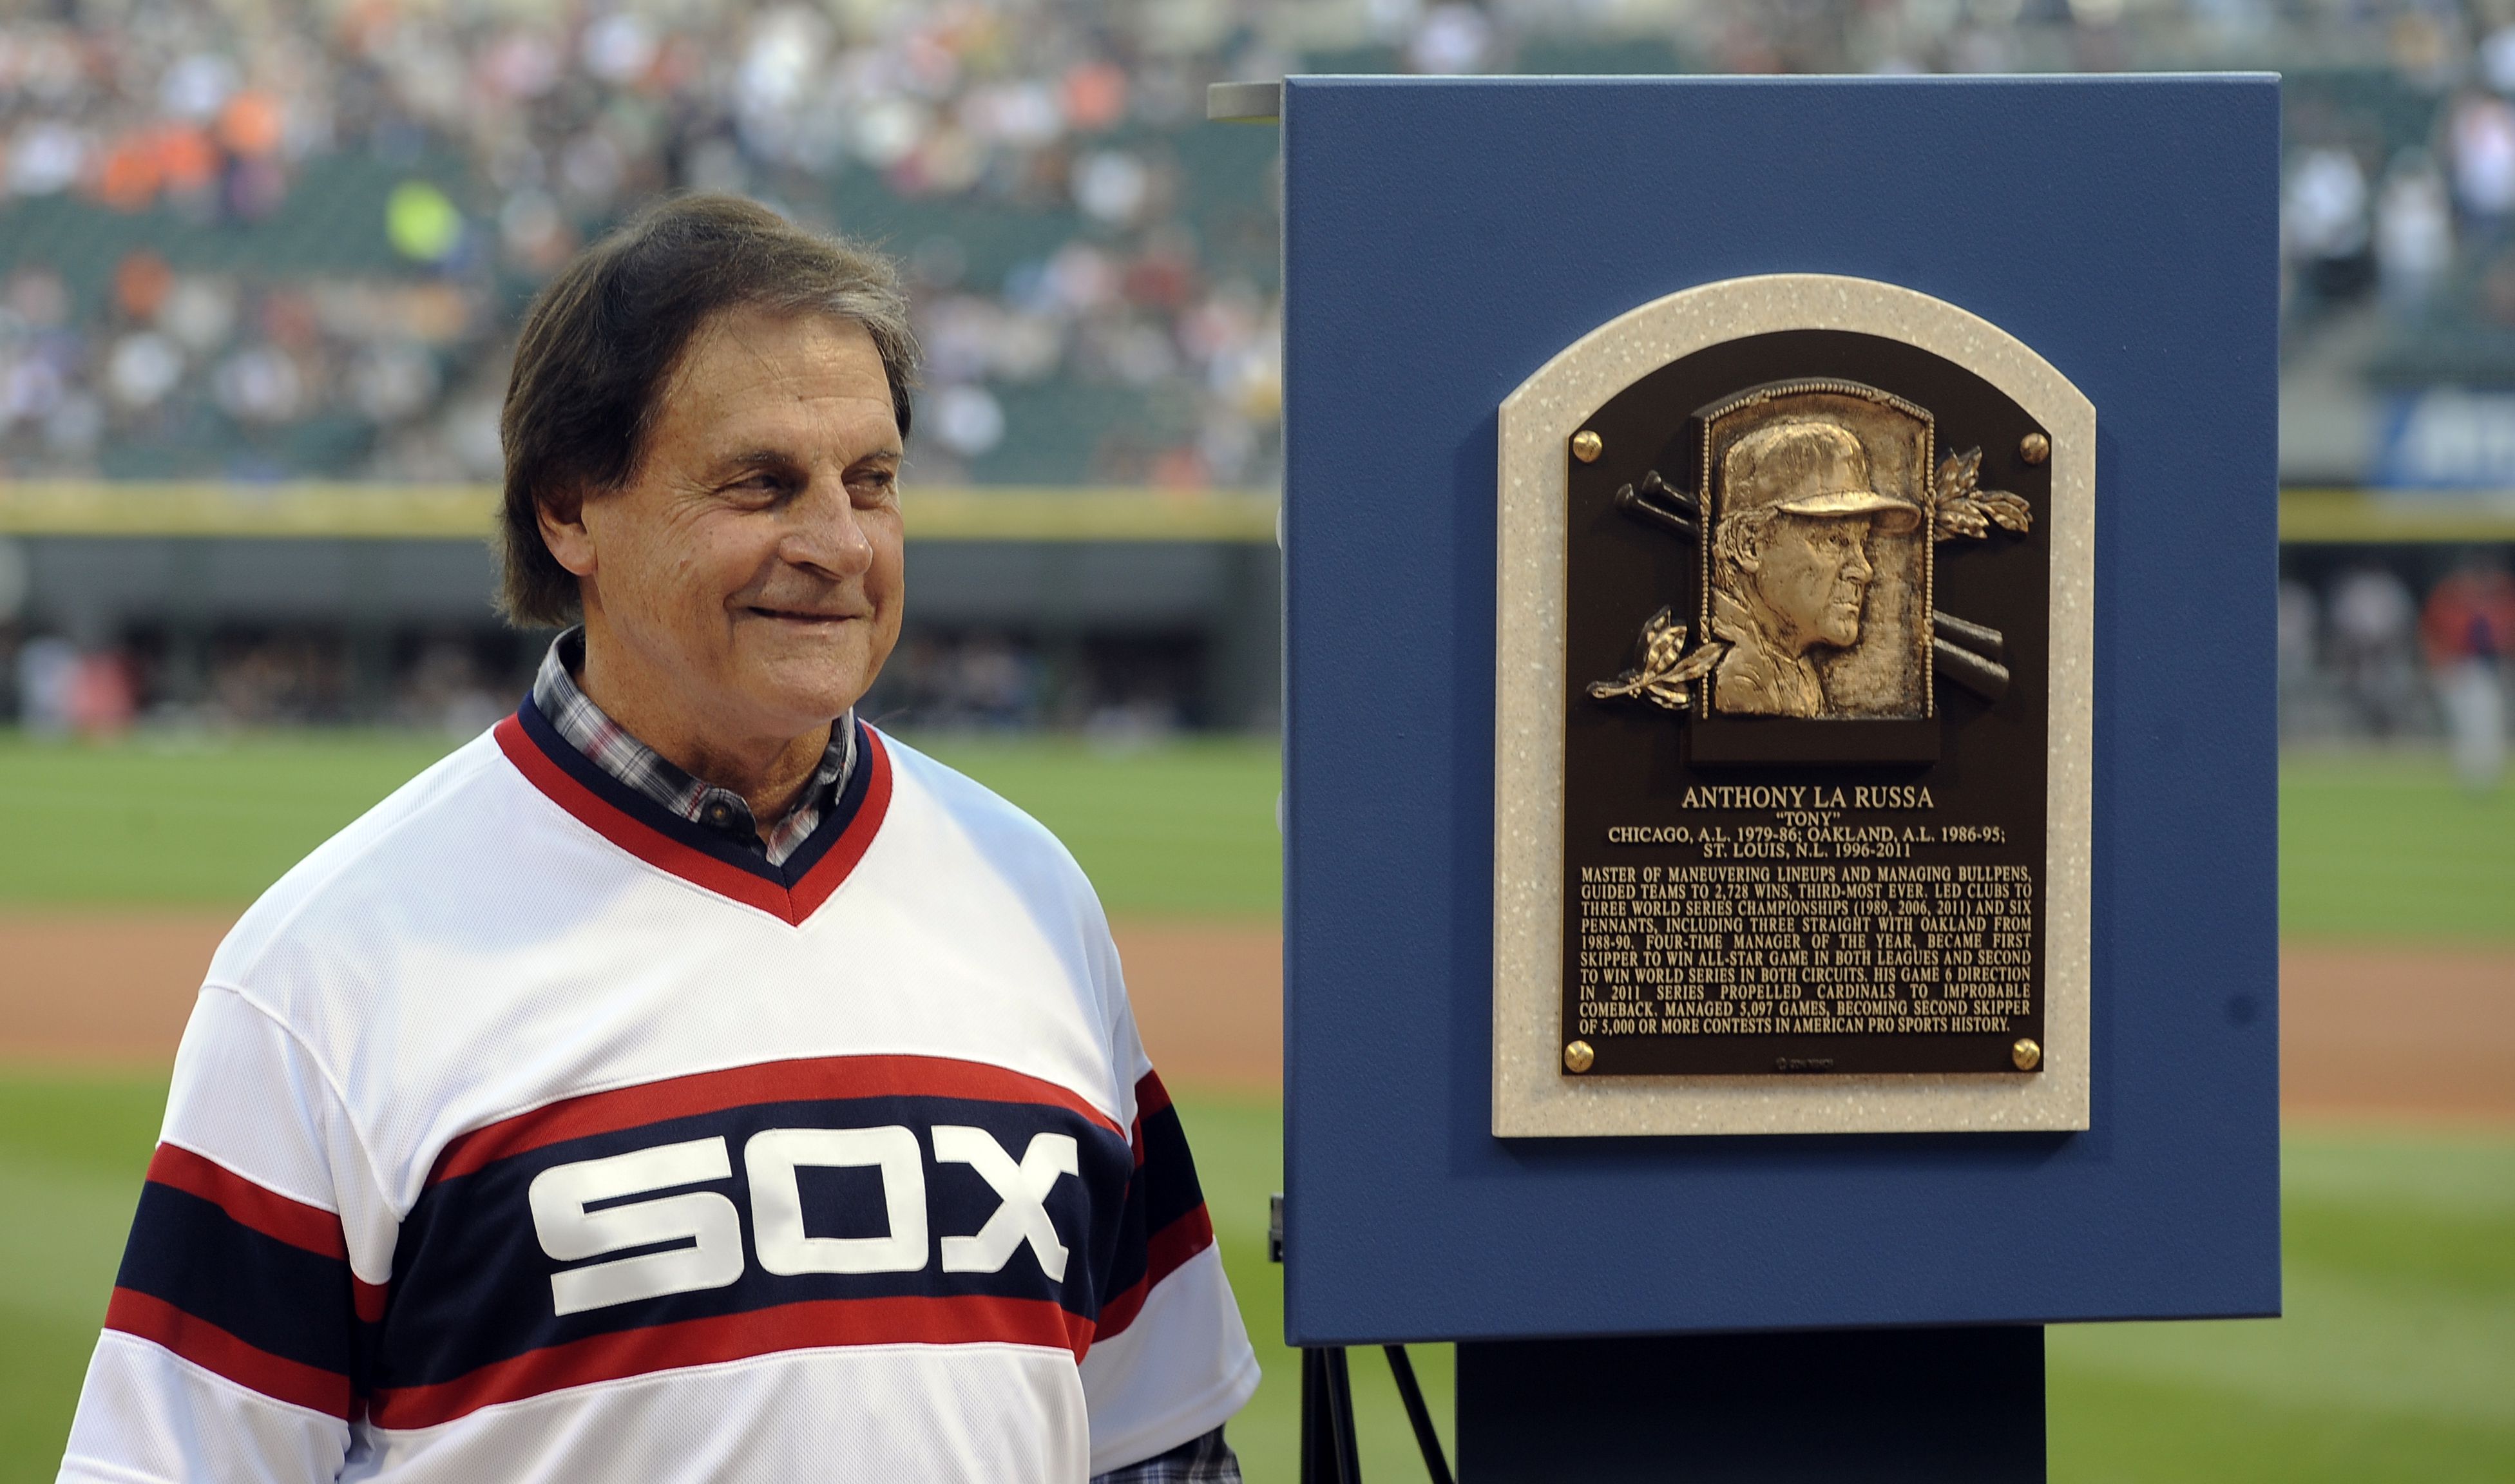 Ex-ace says Tony La Russa had White Sox using camera to steal signs in '80s